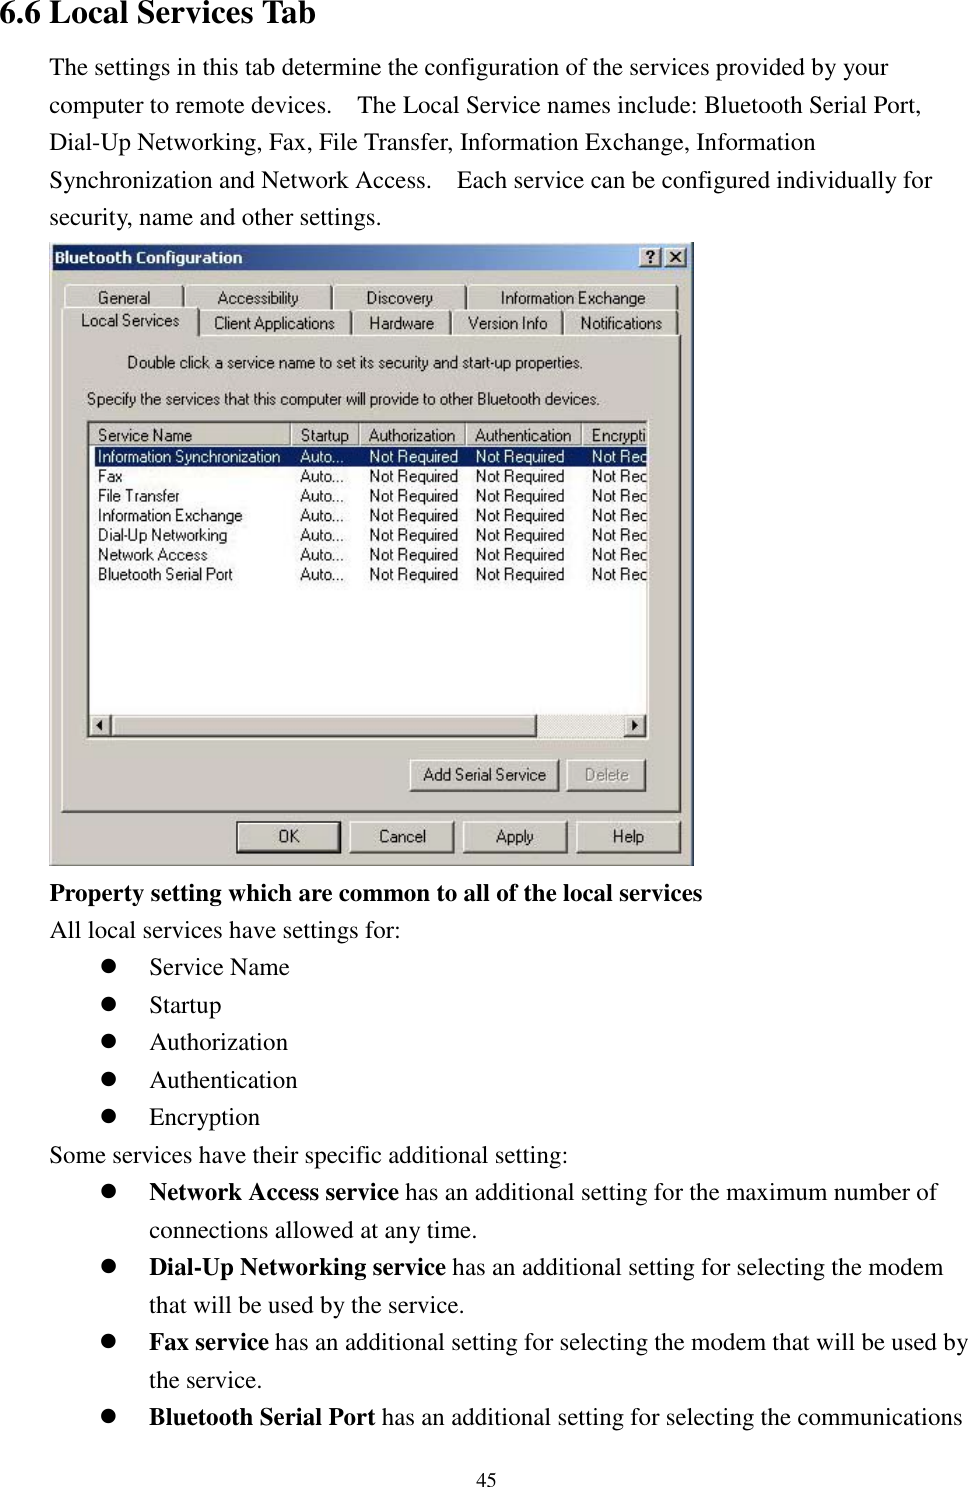 456.6 Local Services TabThe settings in this tab determine the configuration of the services provided by yourcomputer to remote devices.    The Local Service names include: Bluetooth Serial Port,Dial-Up Networking, Fax, File Transfer, Information Exchange, InformationSynchronization and Network Access.    Each service can be configured individually forsecurity, name and other settings.Property setting which are common to all of the local servicesAll local services have settings for:! Service Name! Startup! Authorization! Authentication! EncryptionSome services have their specific additional setting:! Network Access service has an additional setting for the maximum number ofconnections allowed at any time.! Dial-Up Networking service has an additional setting for selecting the modemthat will be used by the service.! Fax service has an additional setting for selecting the modem that will be used bythe service.! Bluetooth Serial Port has an additional setting for selecting the communications